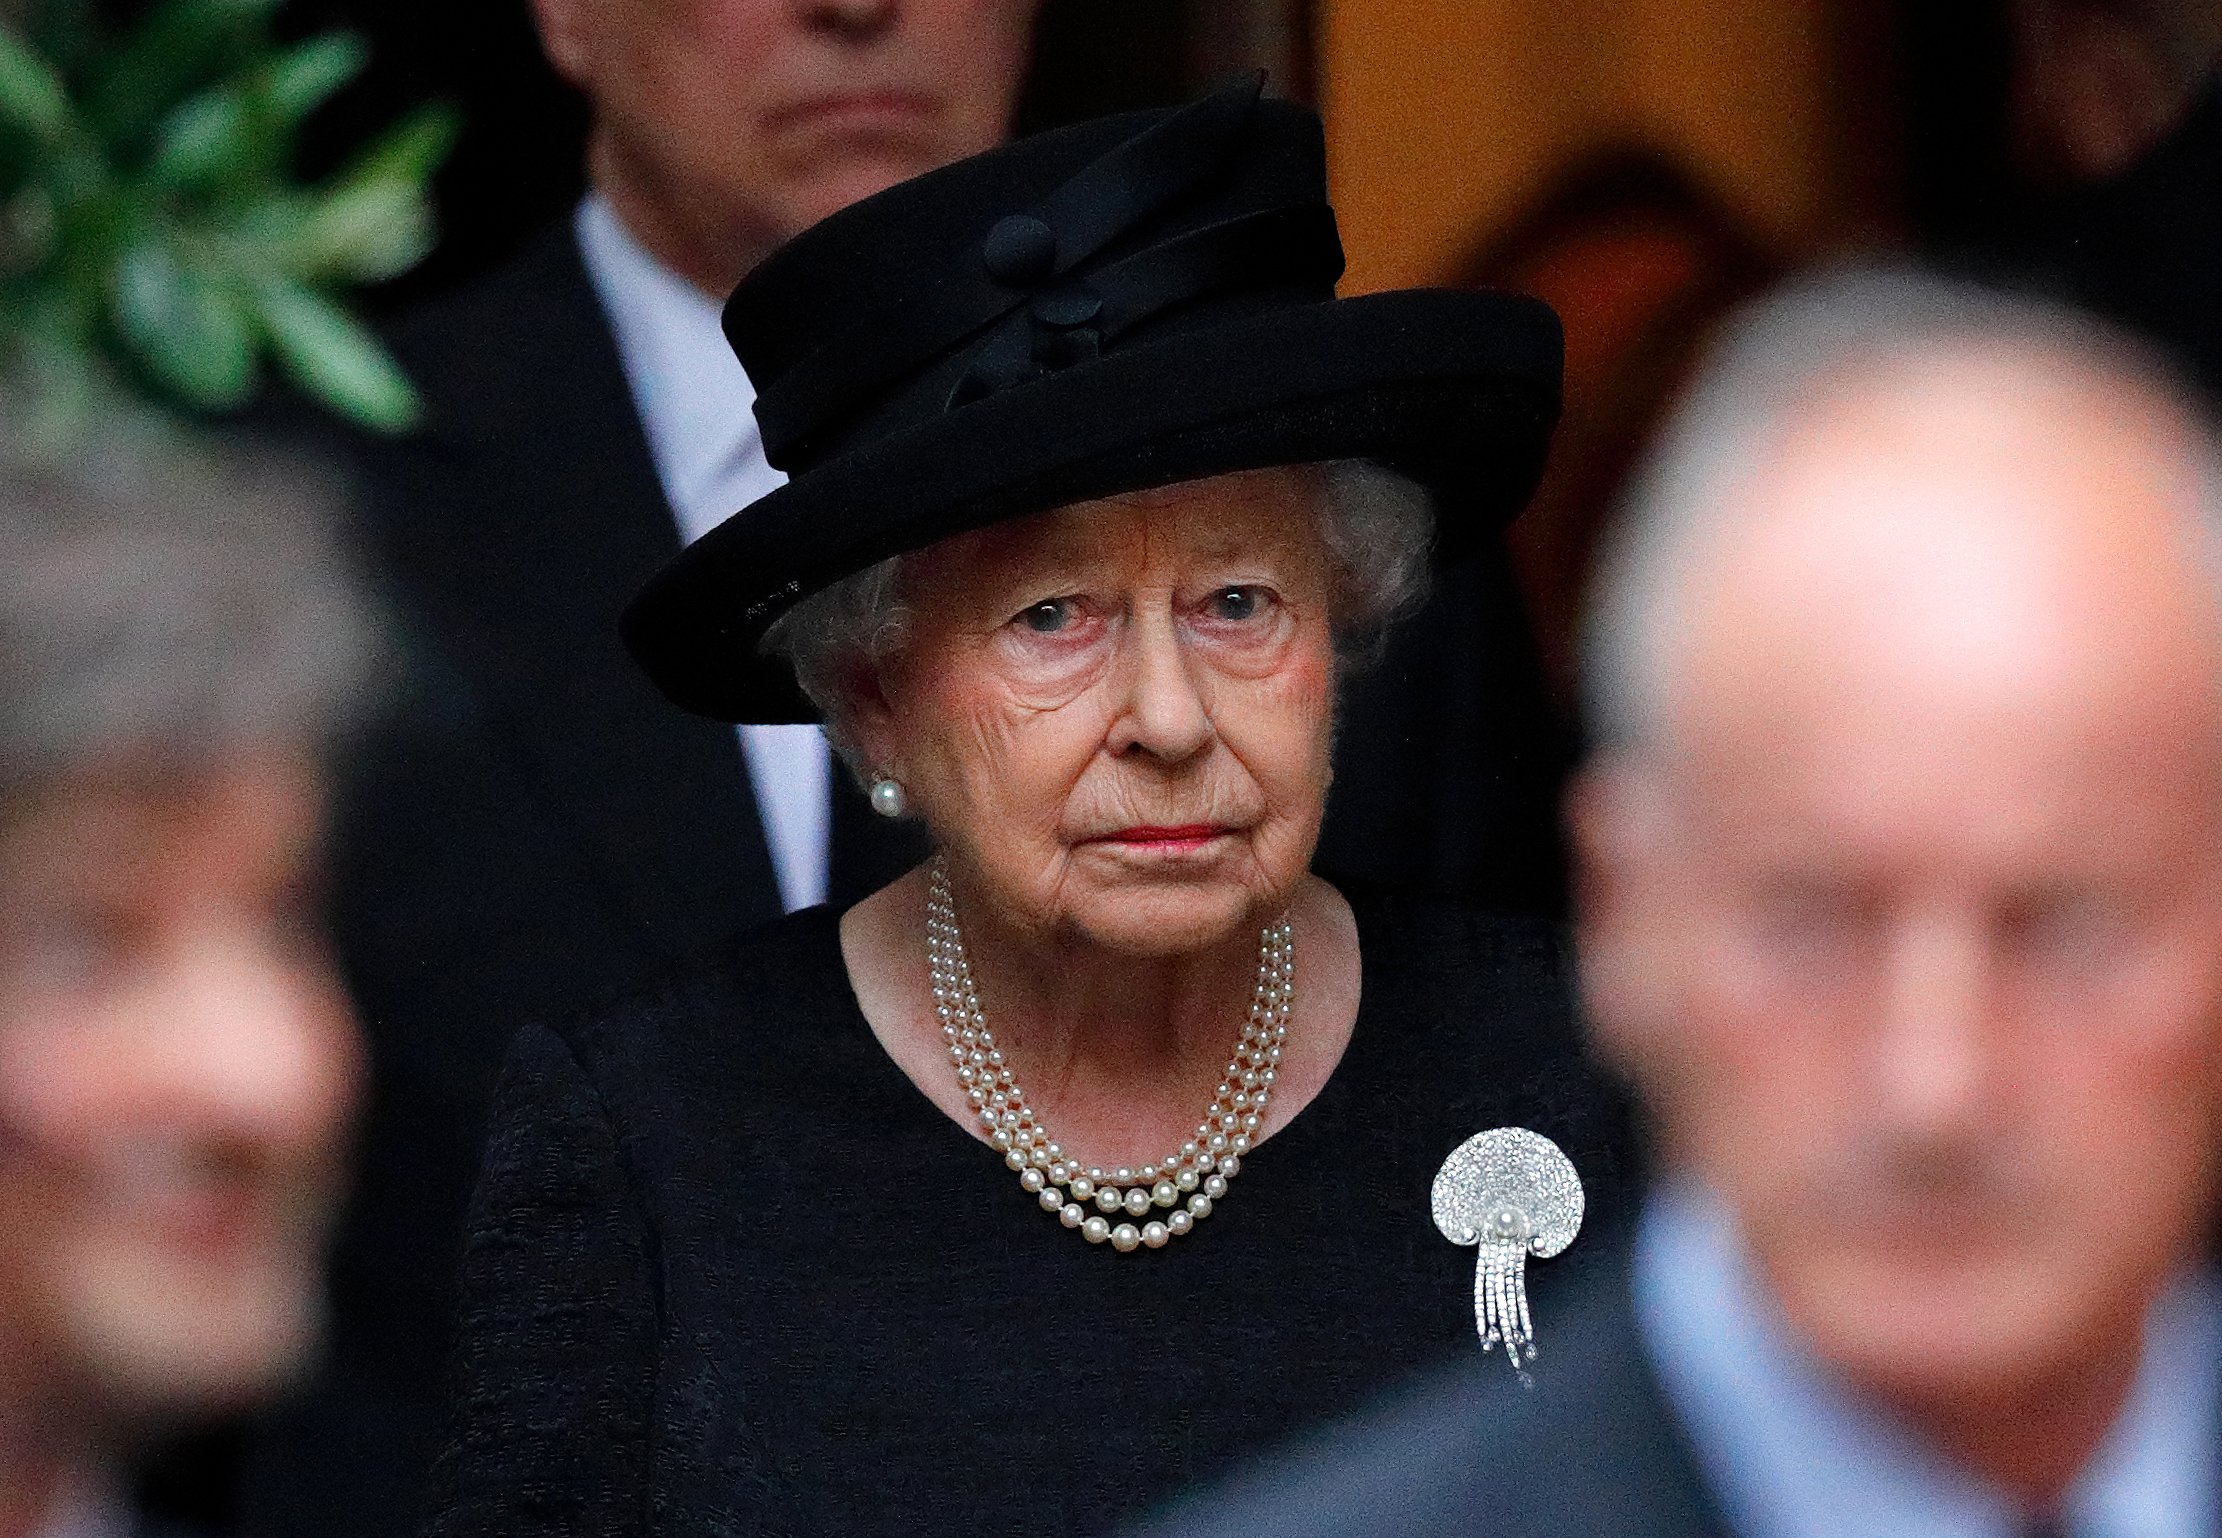 Queen Elizabeth II attends the funeral of Patricia Knatchbull, Countess Mountbatten of Burma at St Paul's Church, Knightsbridge on June 27, 2017 in London, England  | Source: Getty Images